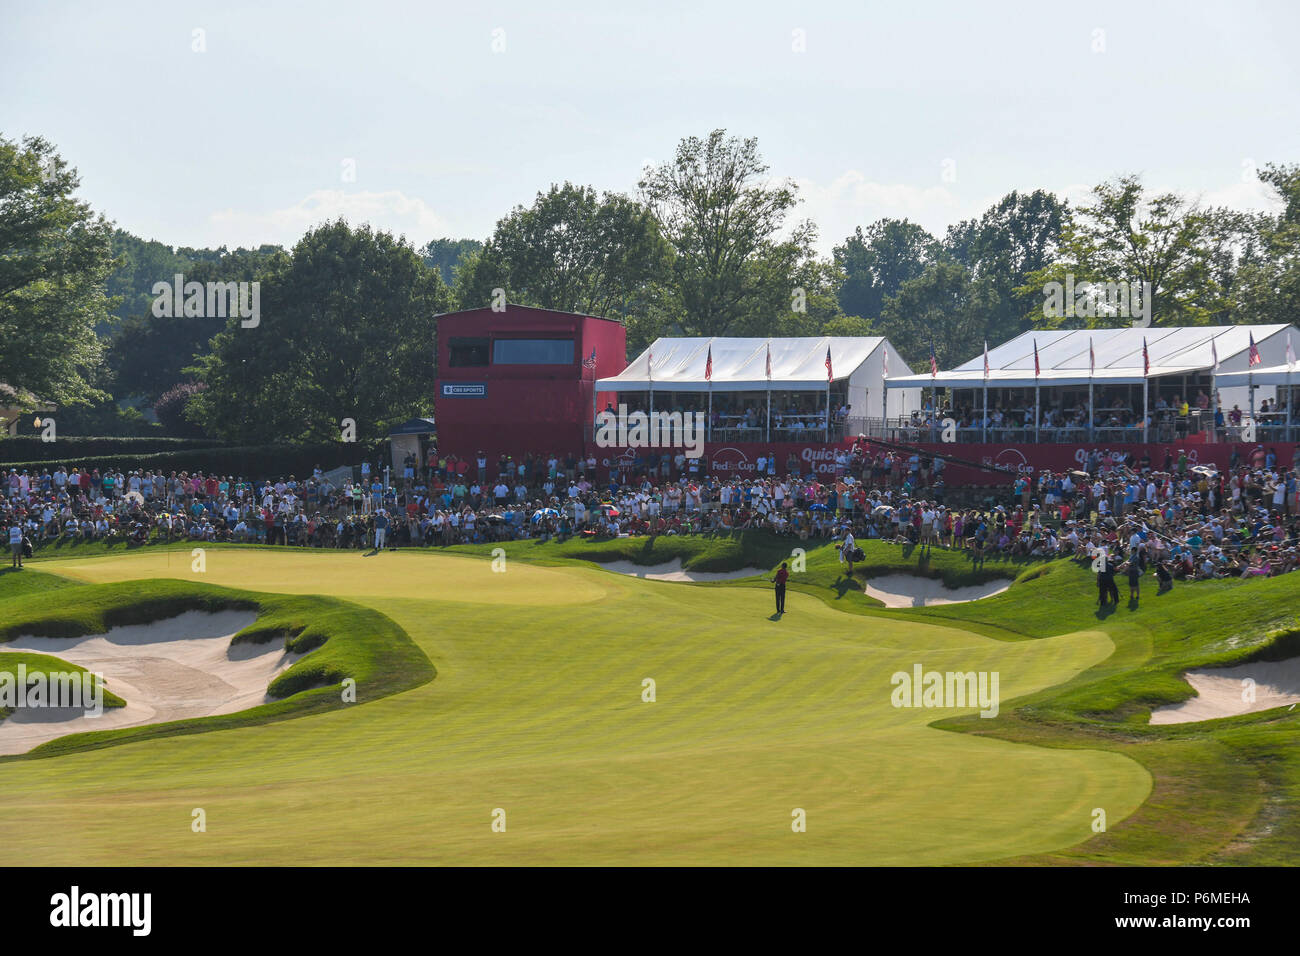 Potomac, MD, USA. 1st July, 2018. Tiger Woods (USA) chips his third shot onto the eighteenth green during the final round at the 2018 Quicken Loans National at the Tournament Players Club in Potomac MD. The largest crowds of the four day tournament stayed at Tiger's side in the near 100 degree heat. Credit: Cal Sport Media/Alamy Live News Stock Photo